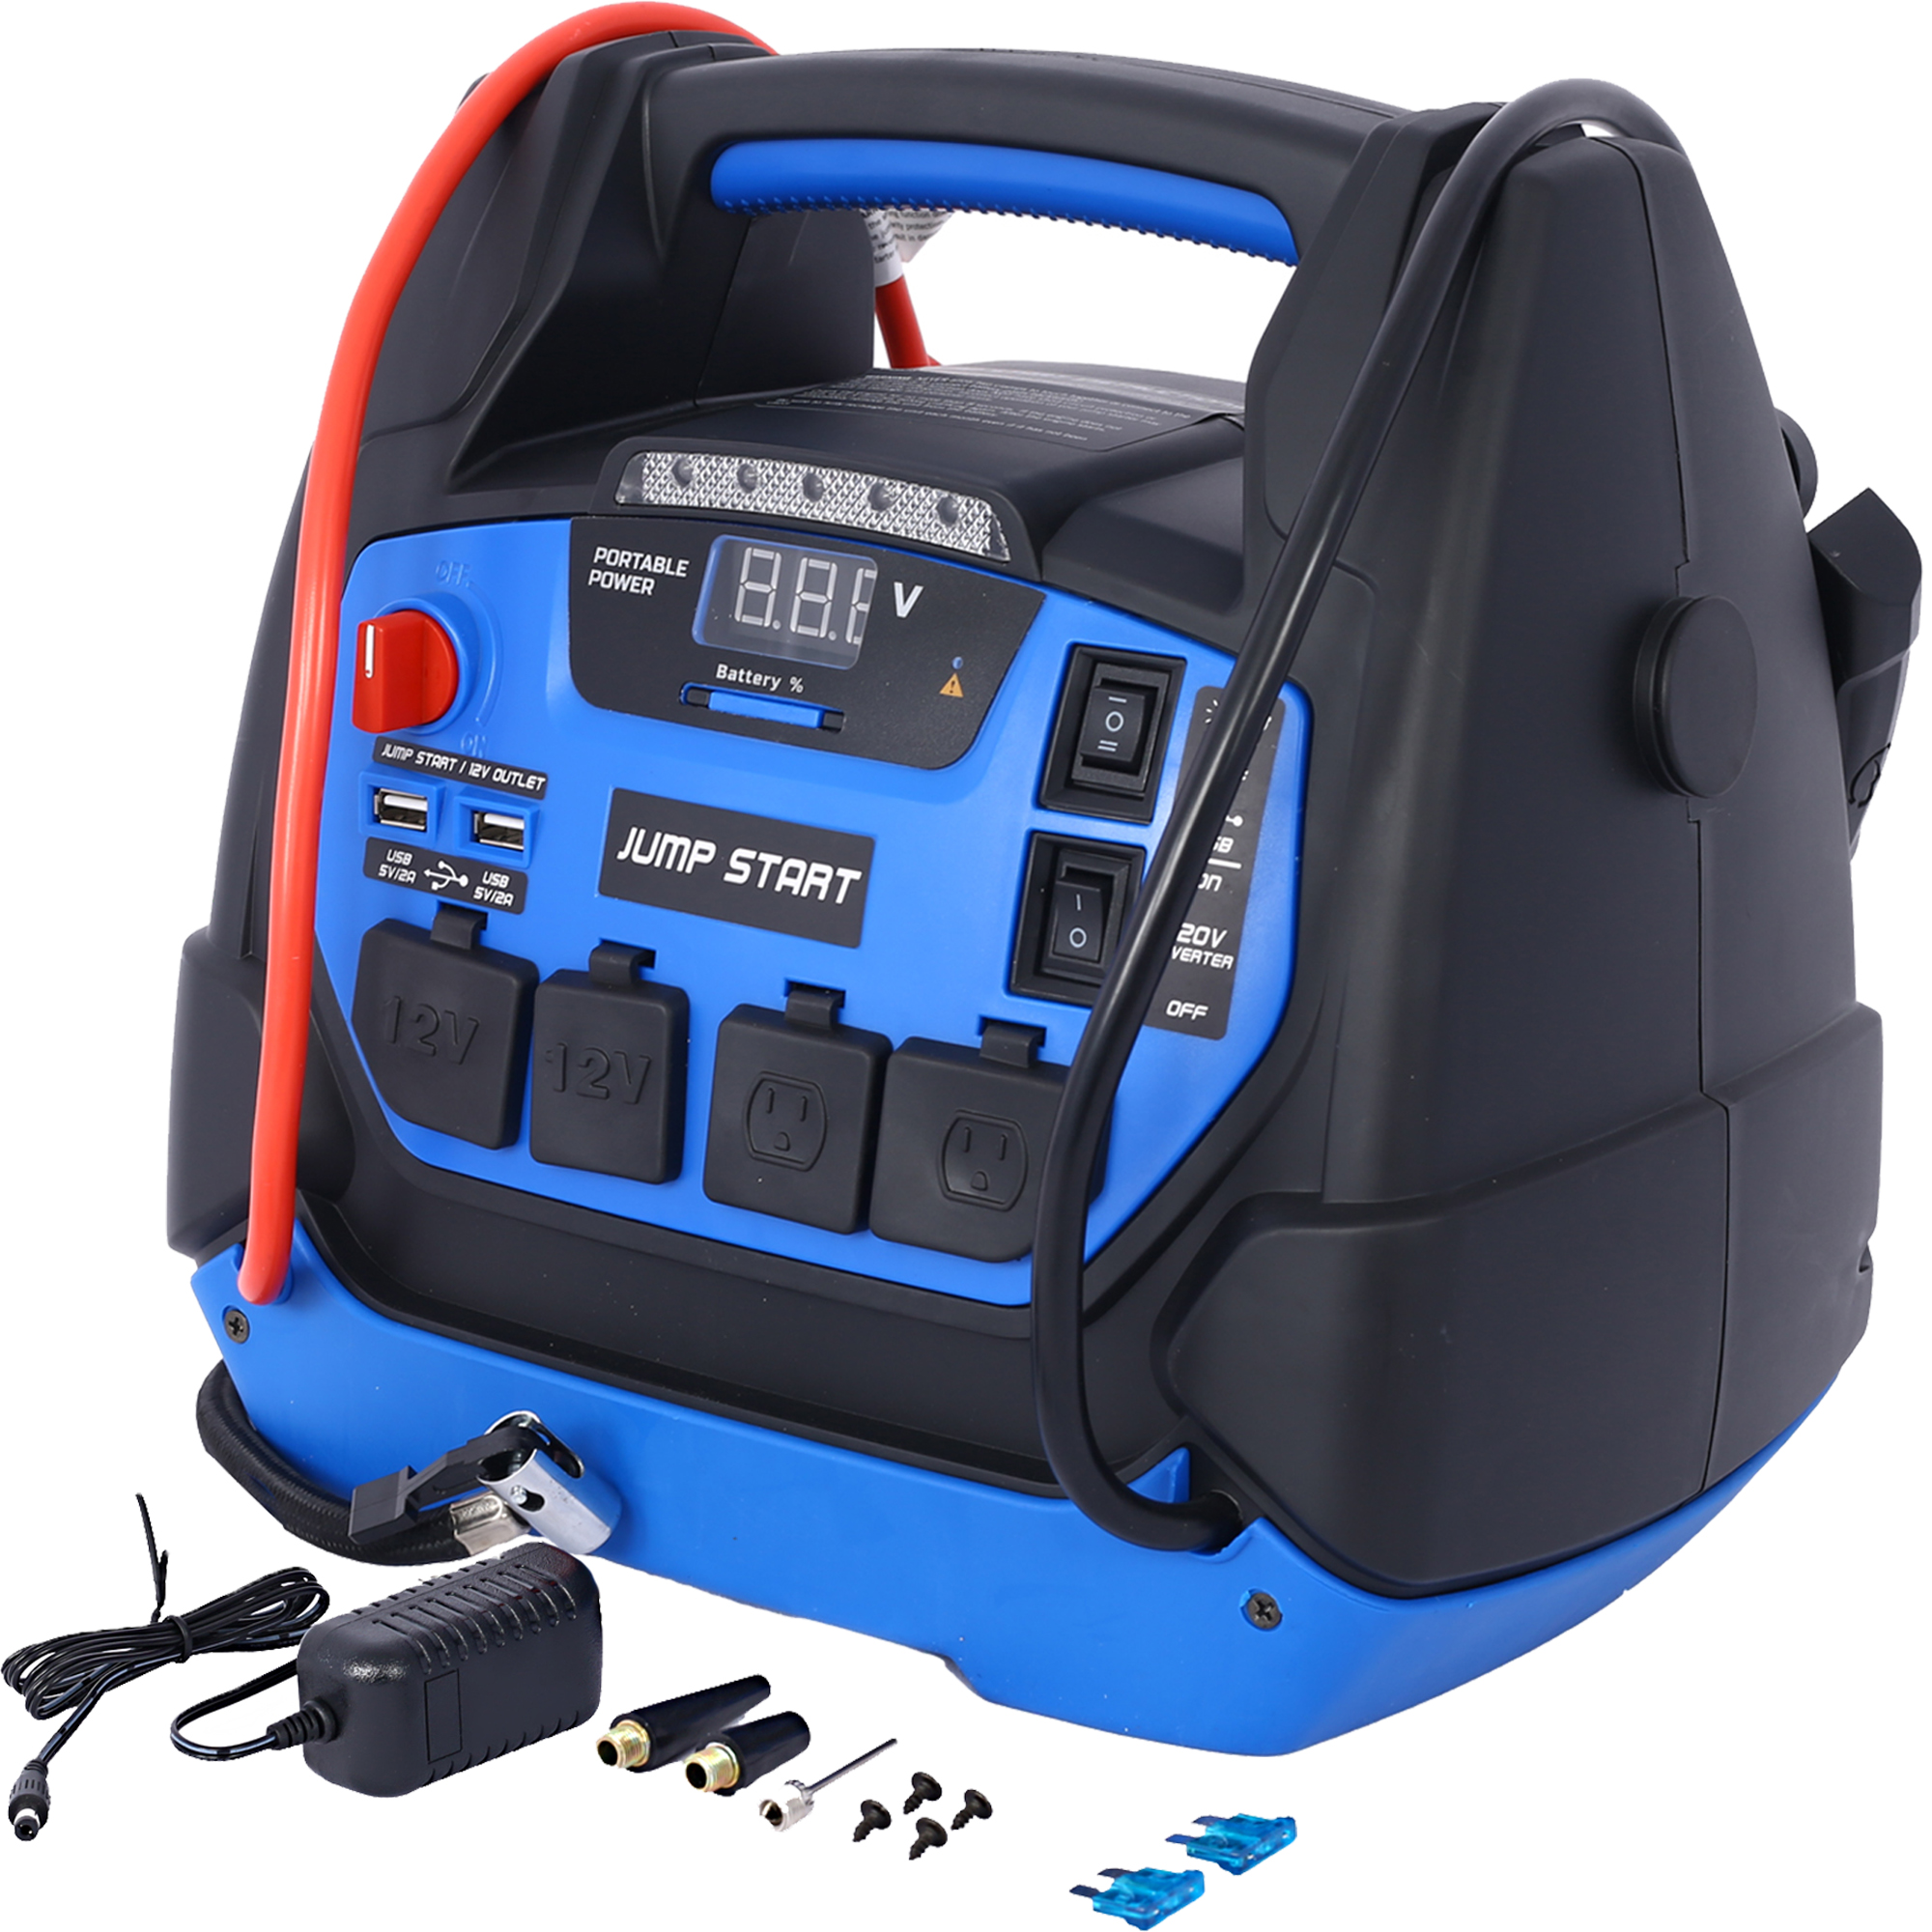 iRerts 1800 Peak Amp Jump Starter, Rechargeable Jump Starter for Gas Diesel Vehicles, Portable Power Station Powerhouse with Air Compressor, 2 DC Outlets, 2 AC Outlets, and 2 USB Ports - image 1 of 10